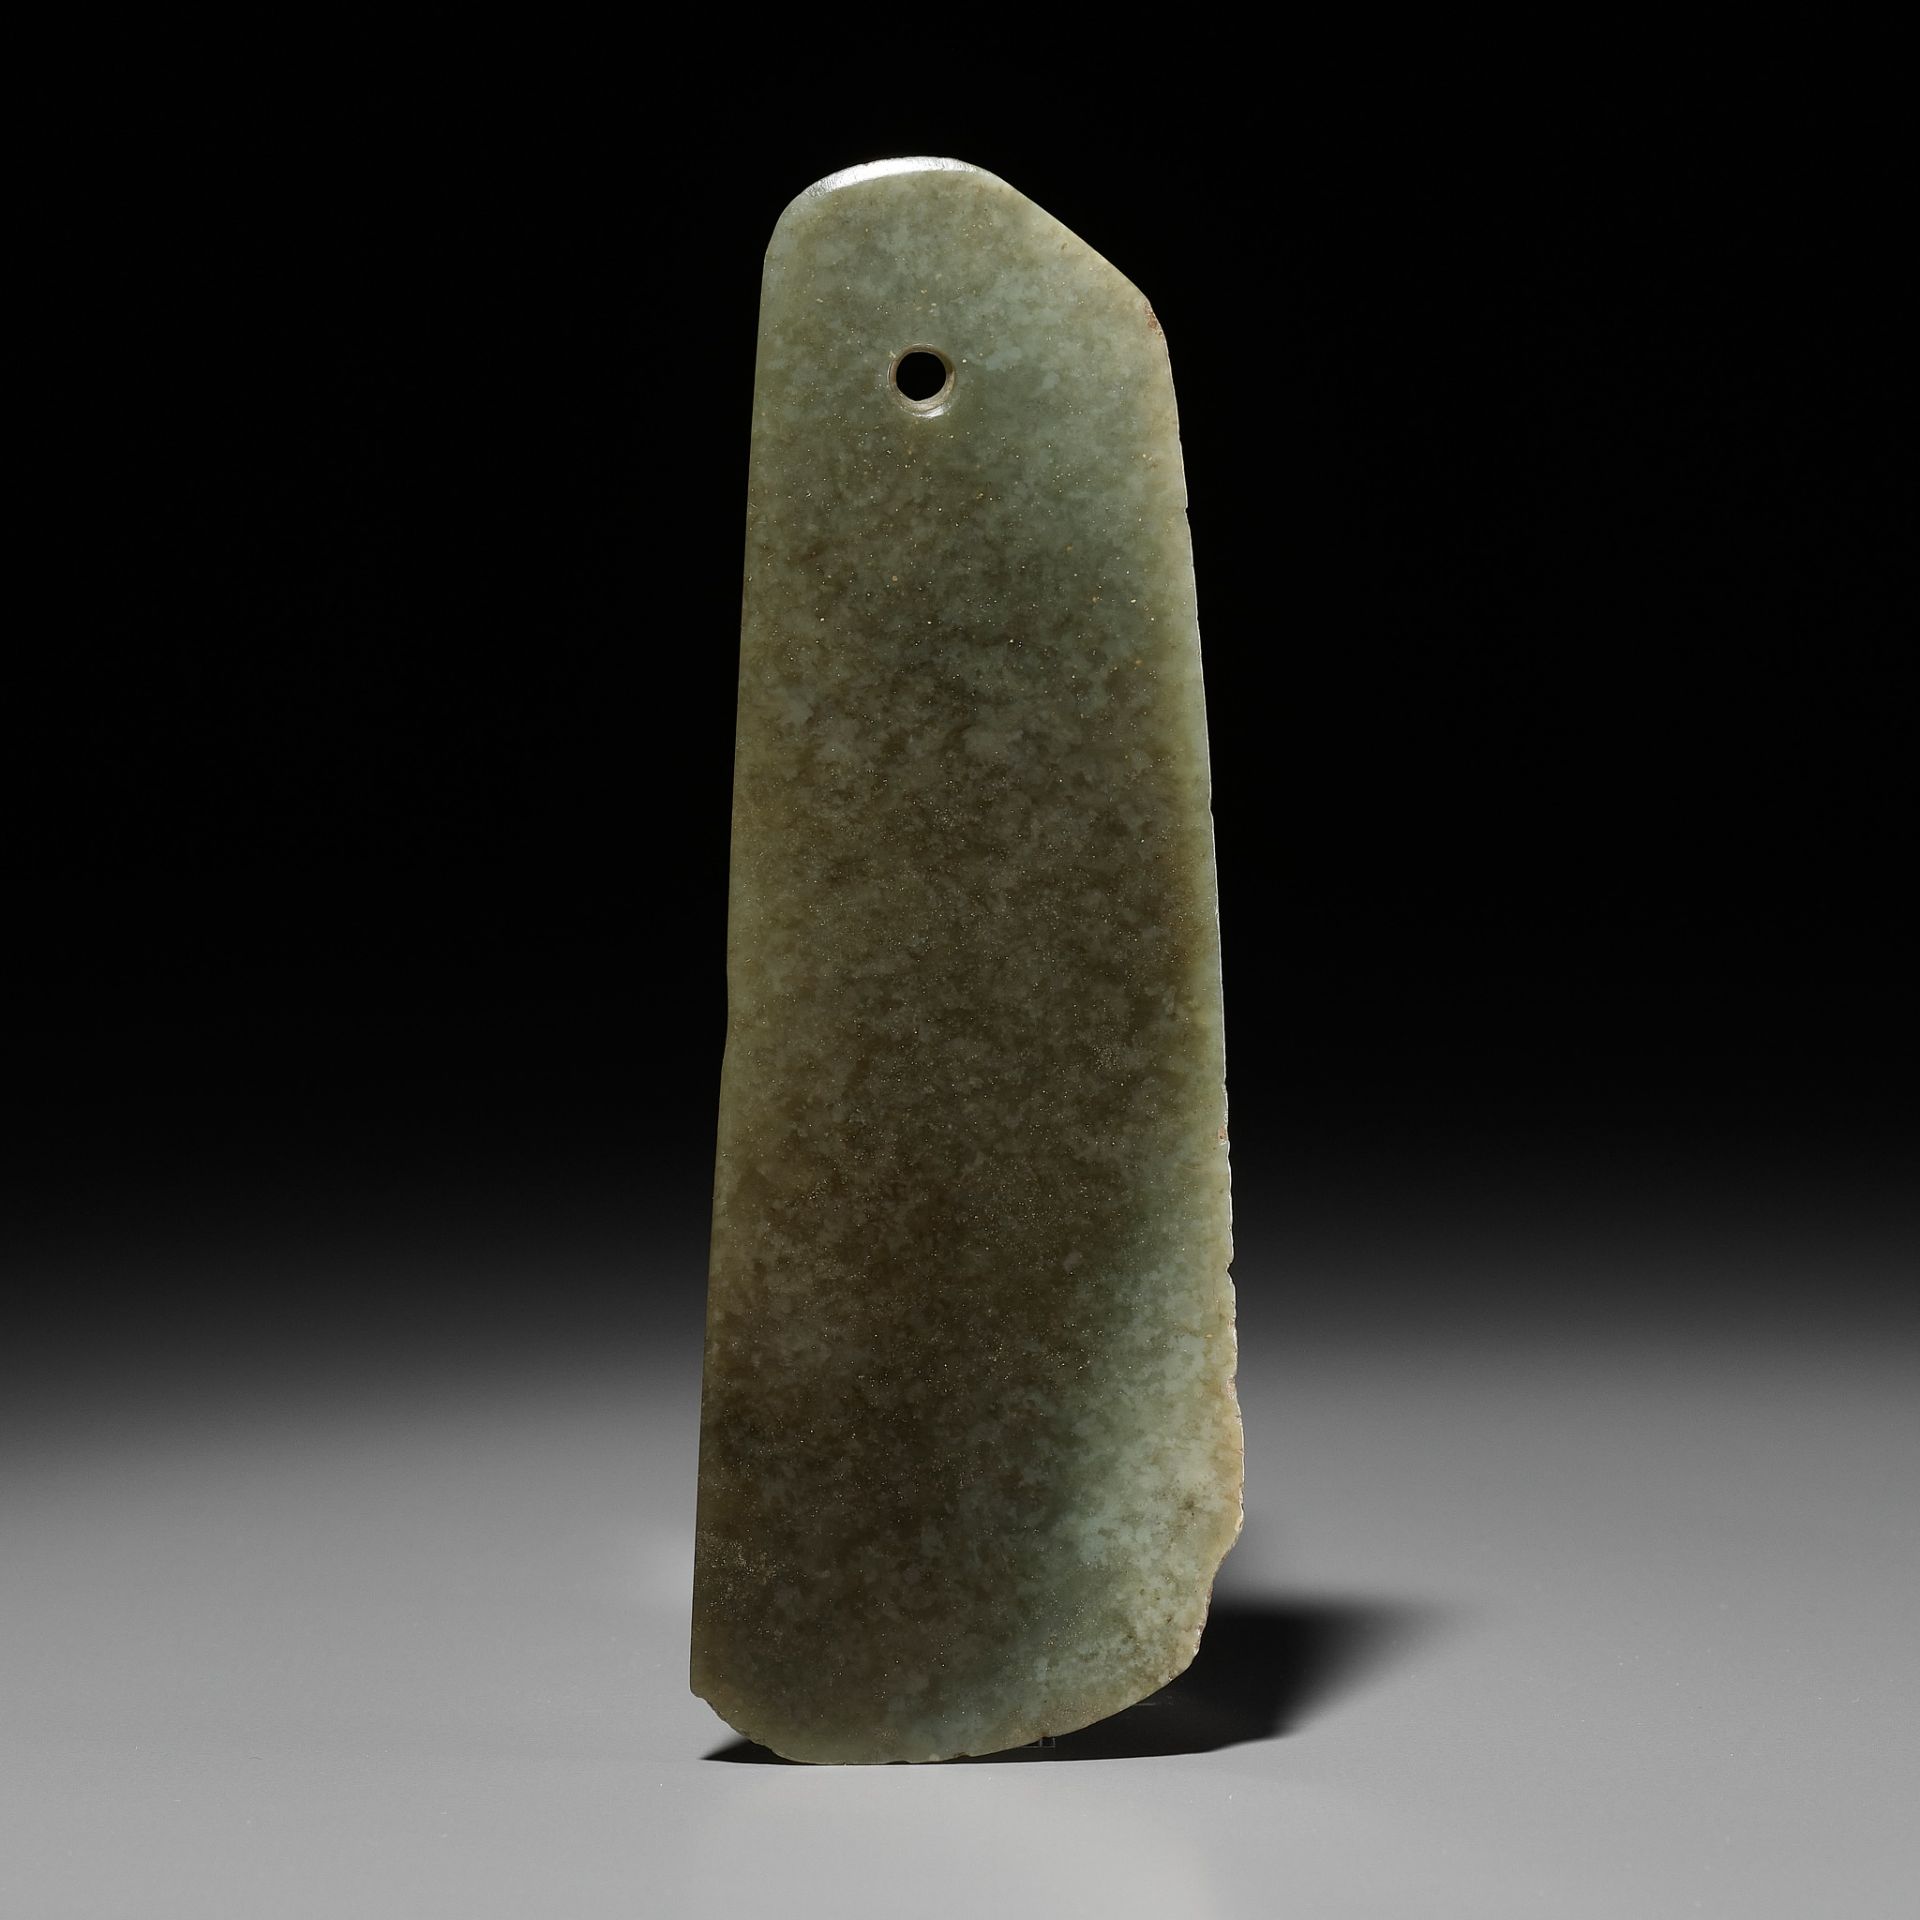 AN ARCHAIC CEREMONIAL JADE BLADE, YUE, NEOLITHIC PERIOD TO SHANG DYNASTY